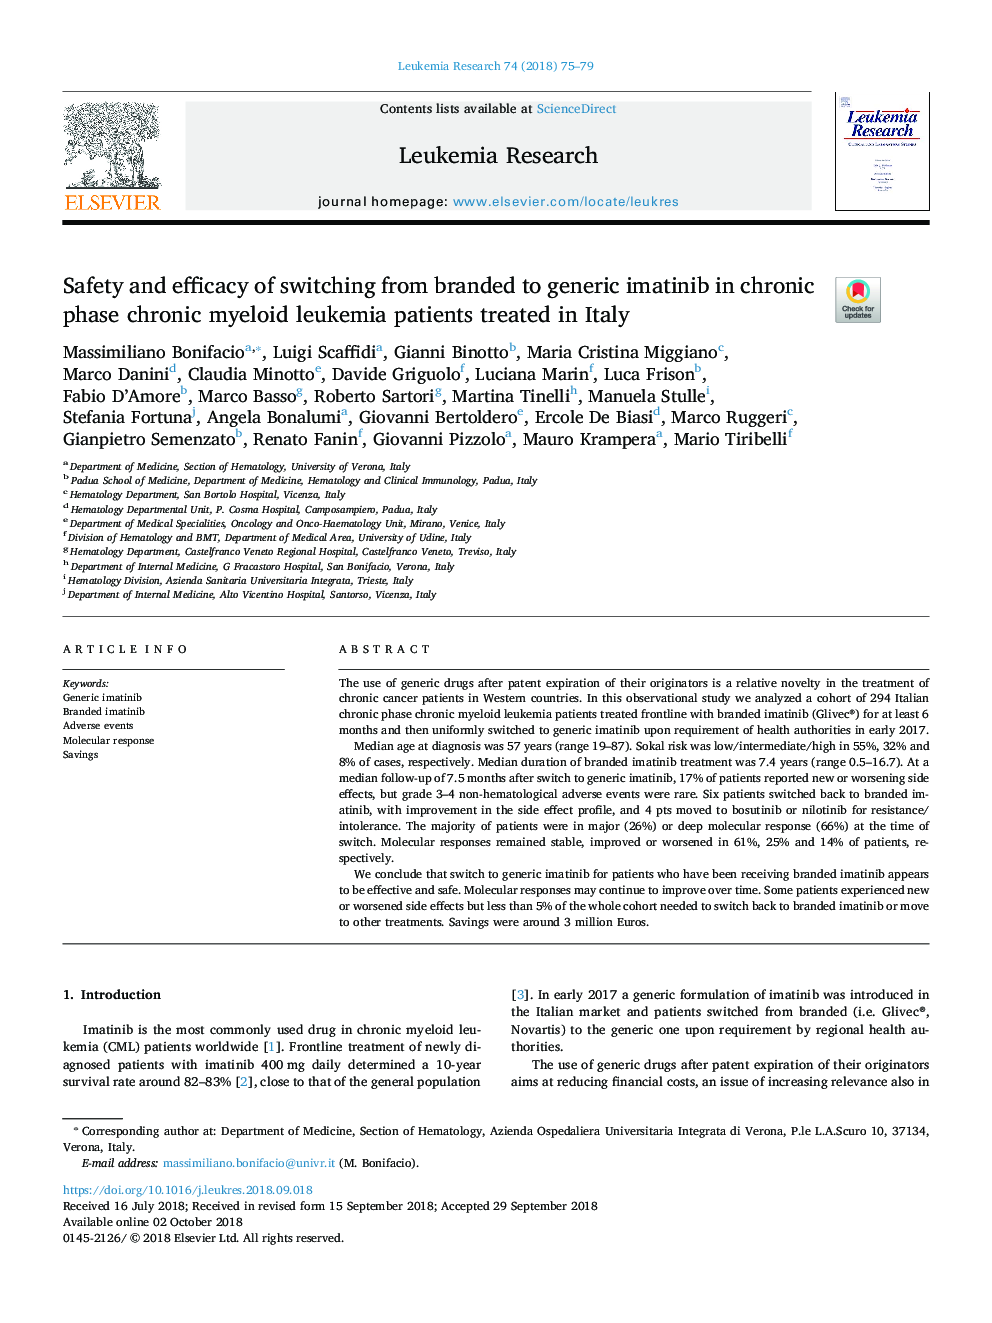 Safety and efficacy of switching from branded to generic imatinib in chronic phase chronic myeloid leukemia patients treated in Italy